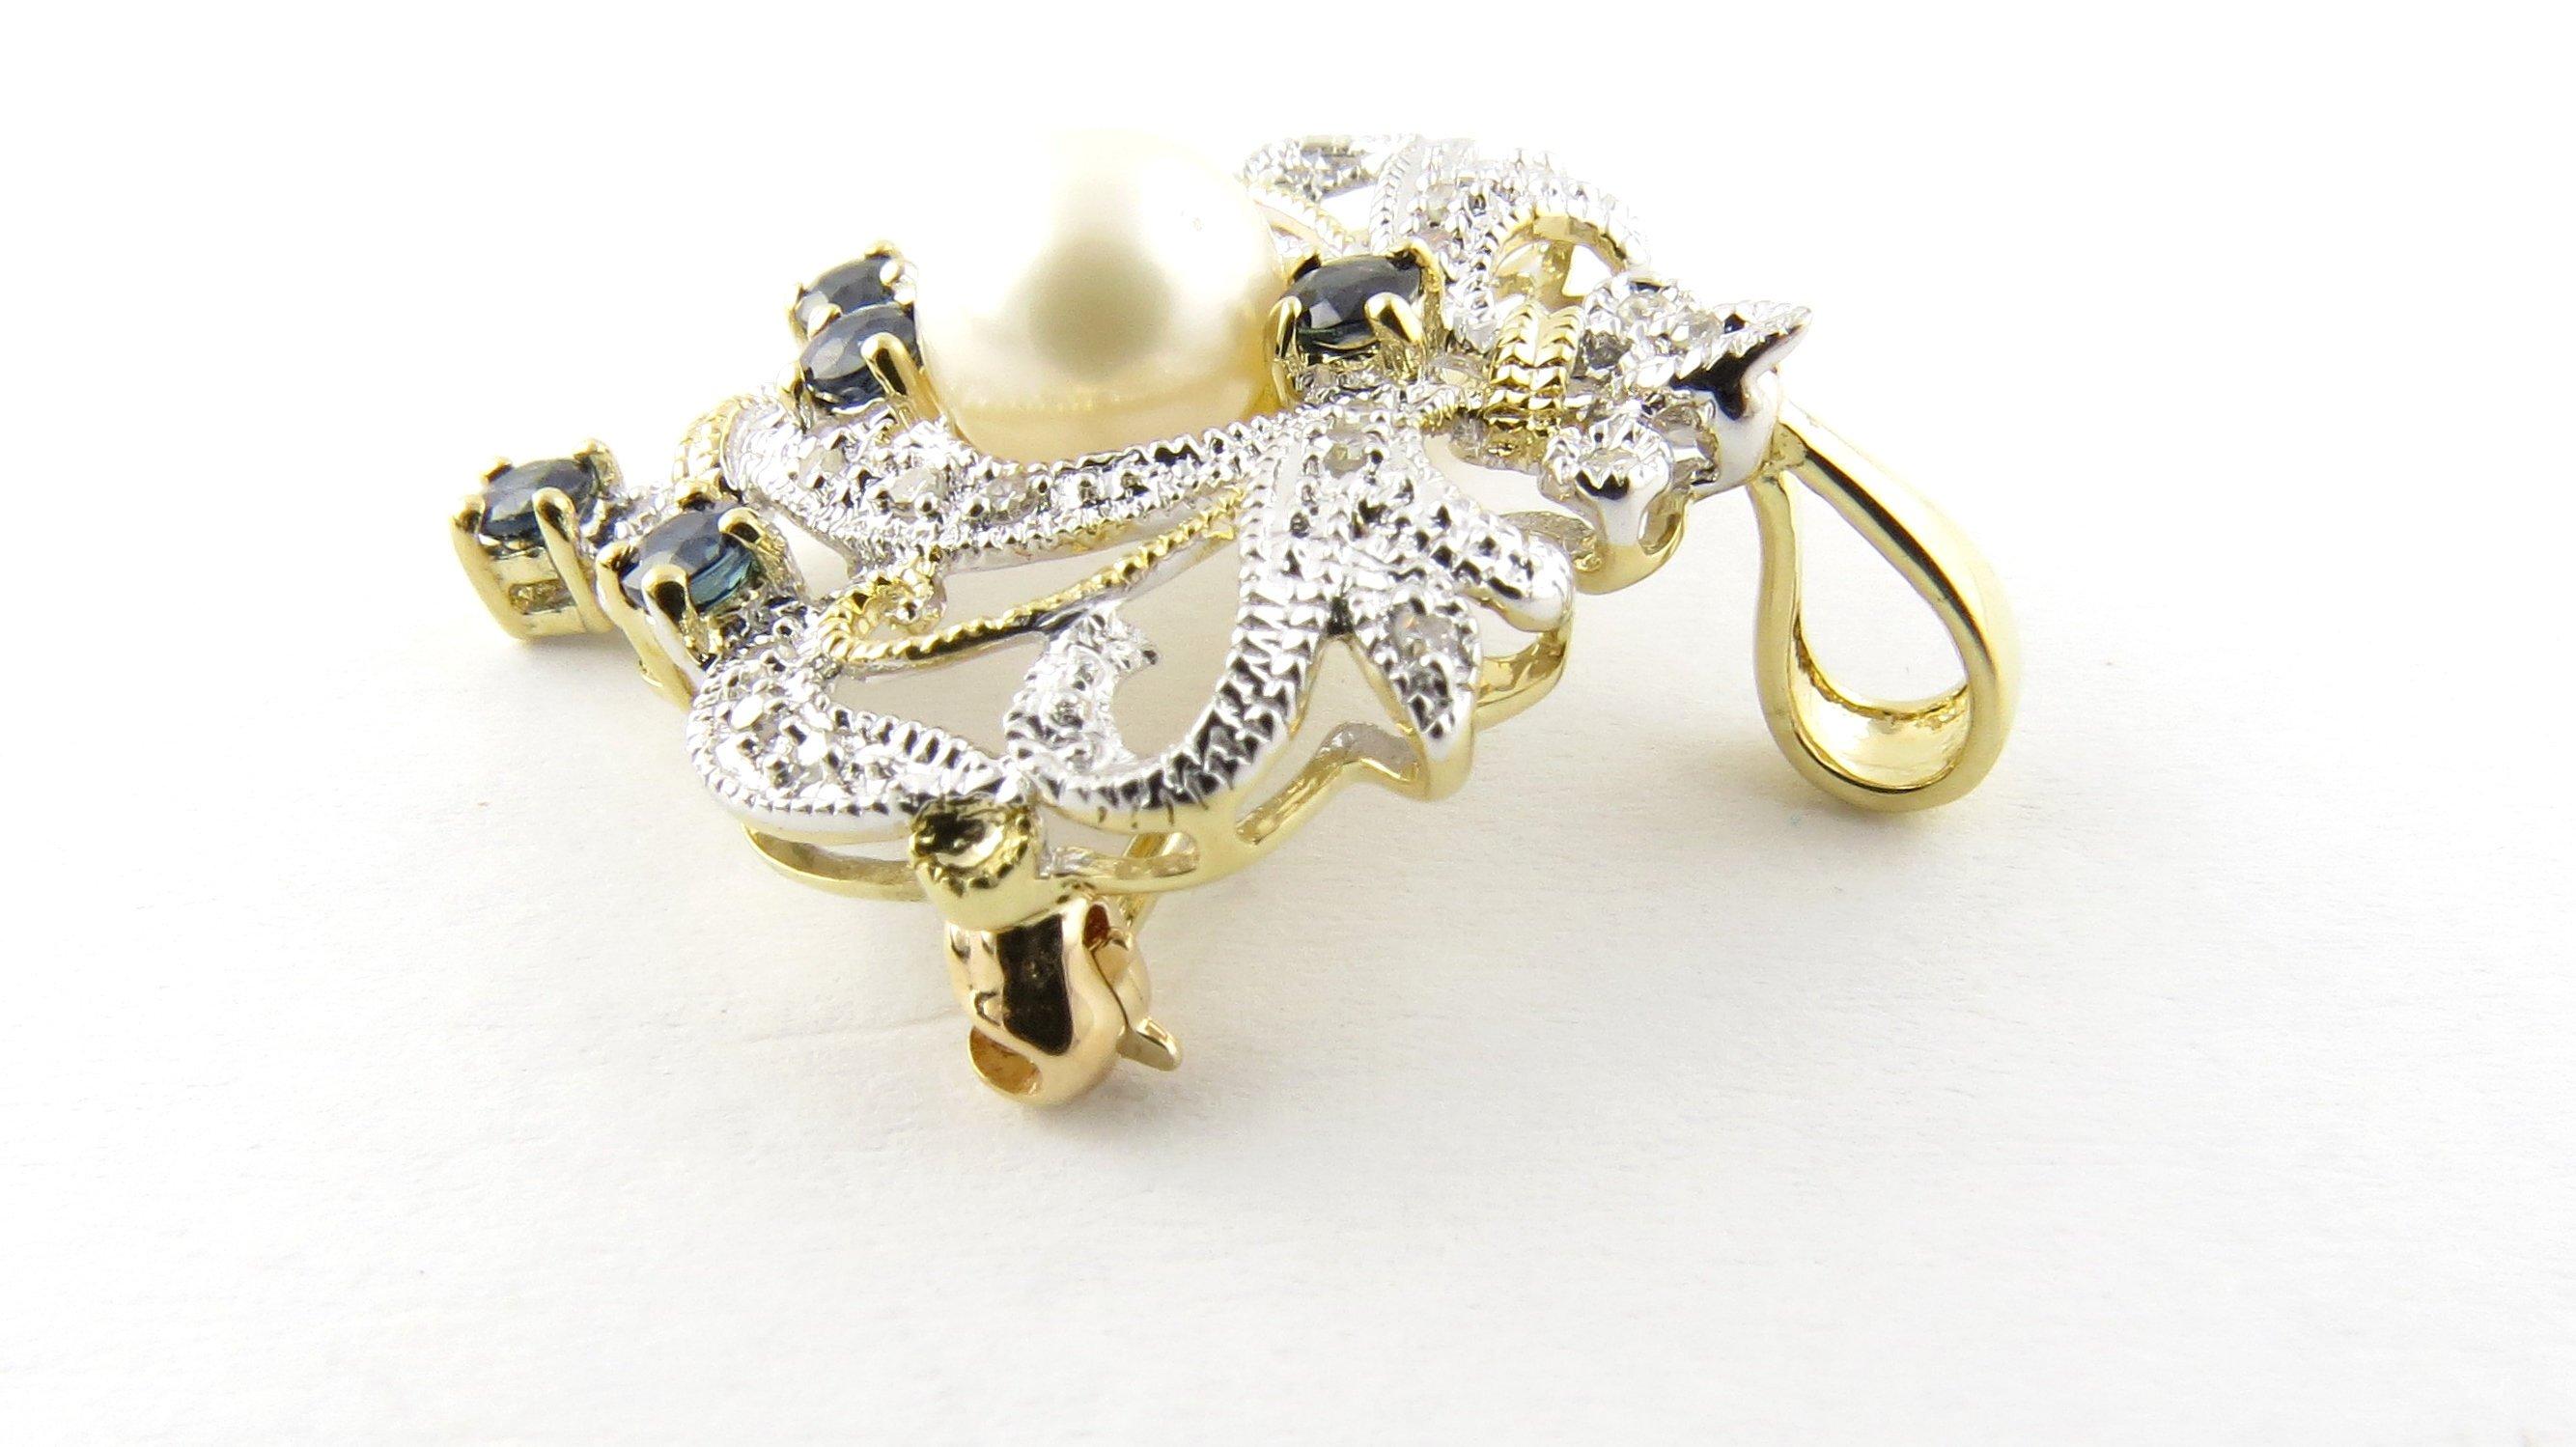 14 Karat White and Yellow Gold Diamond, Sapphire and Pearl Brooch or Pendant 2